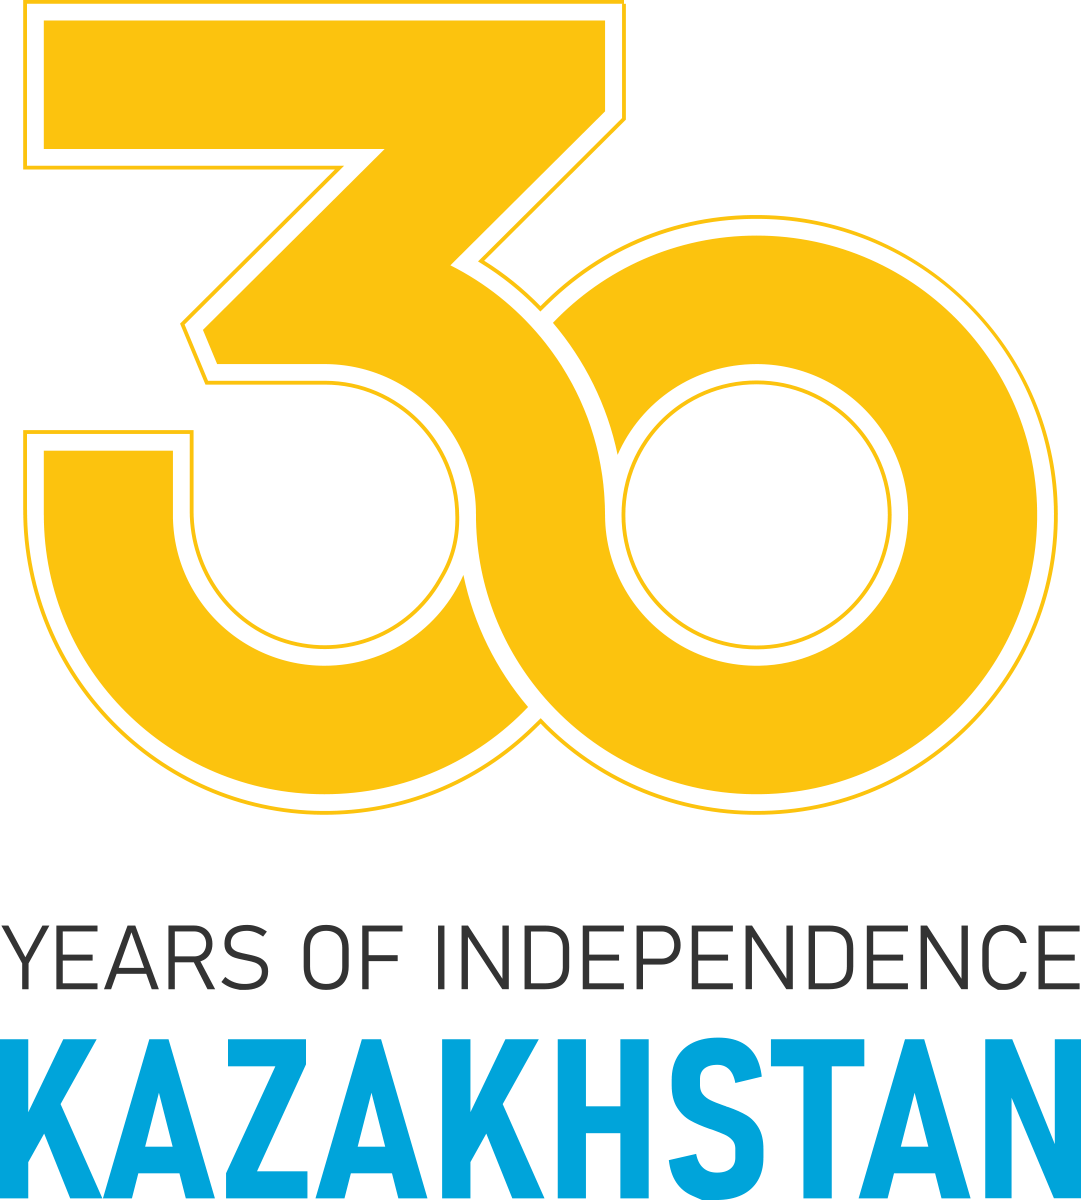 YEARS OF INDEPENDENCE KAZAKHSTAN